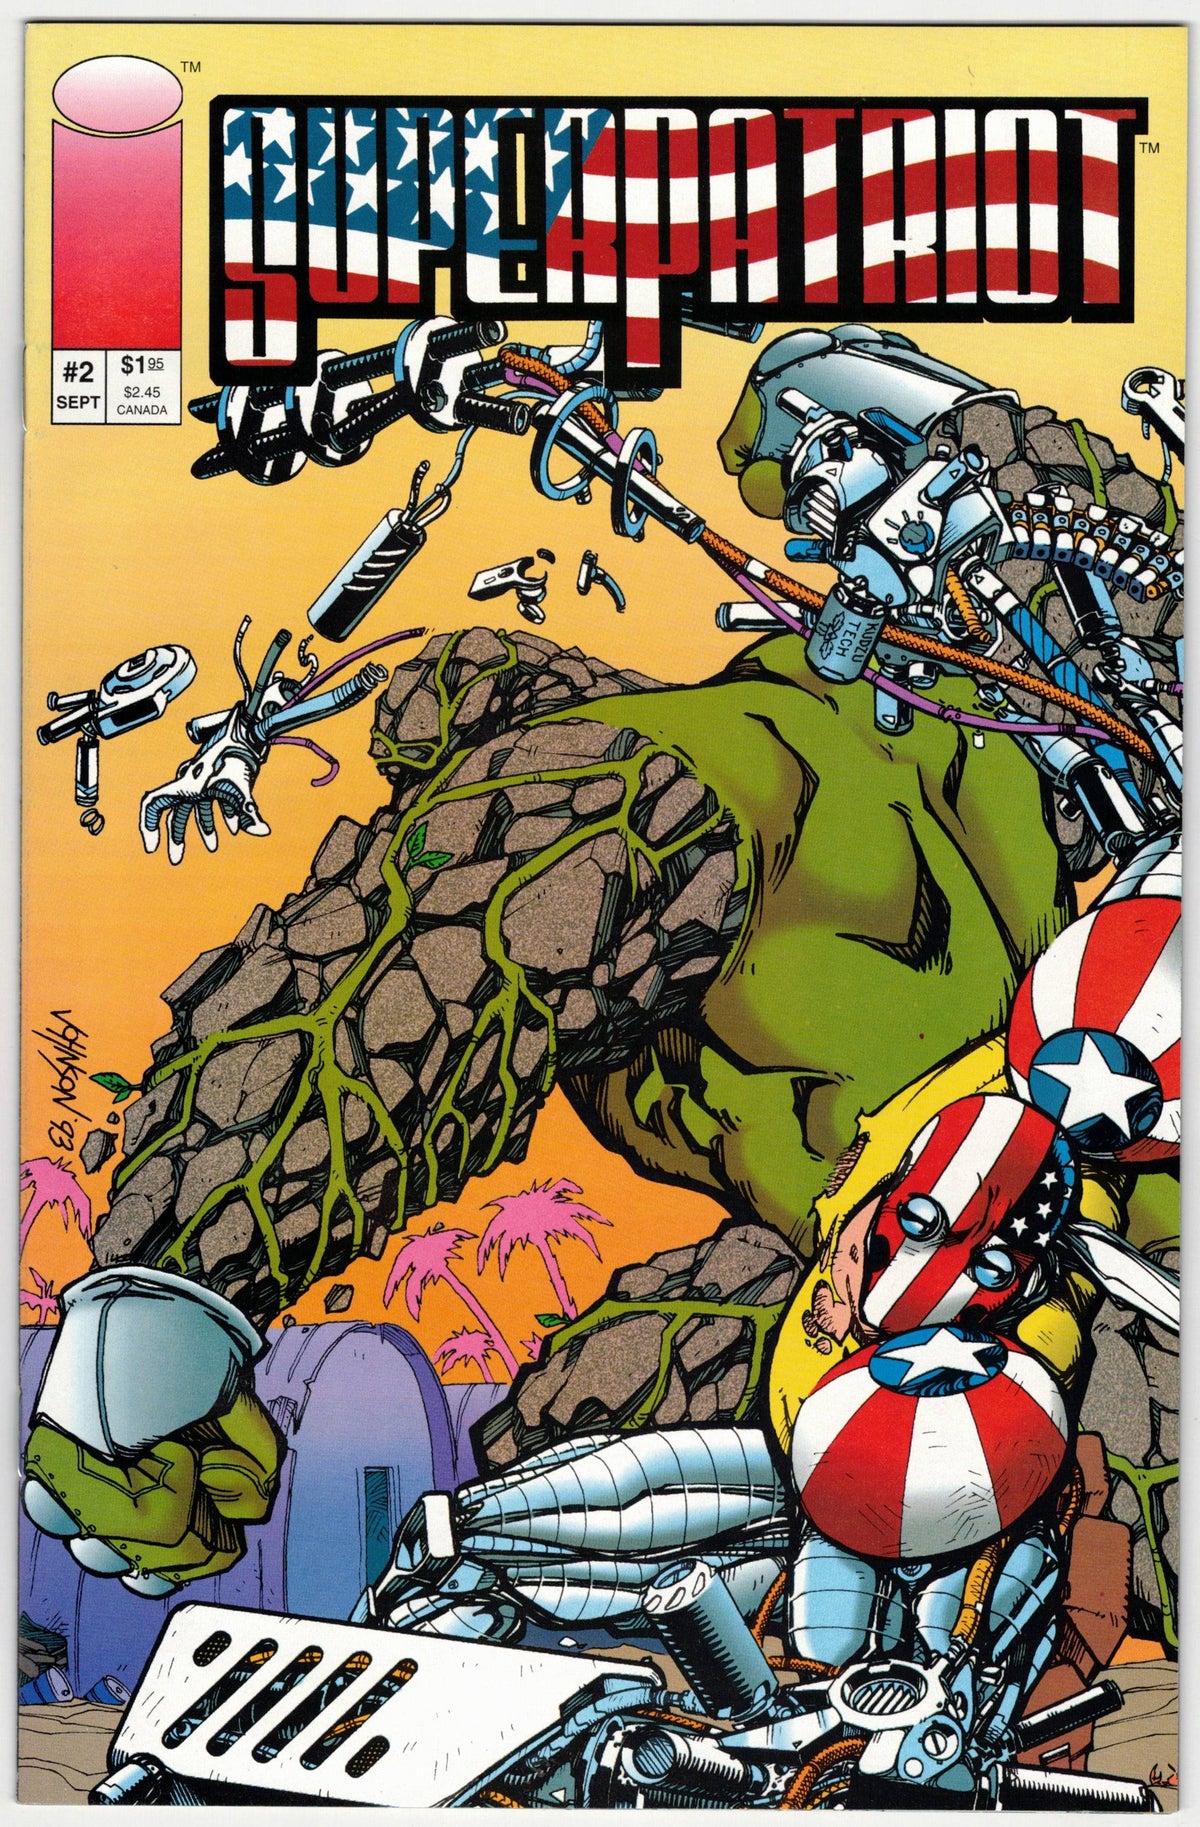 Photo of Superpatriot (1993) Issue 2 - Comic sold by Stronghold Collectibles